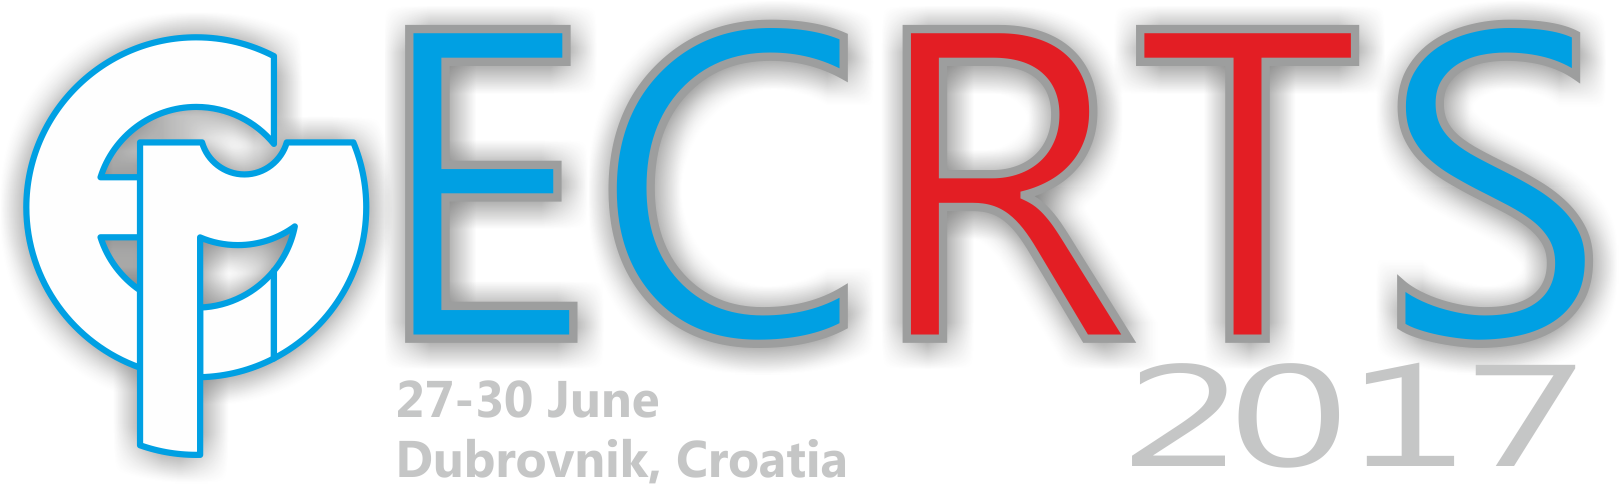 Euromicro Conference on Real-Time Systems - ECRTS-2017